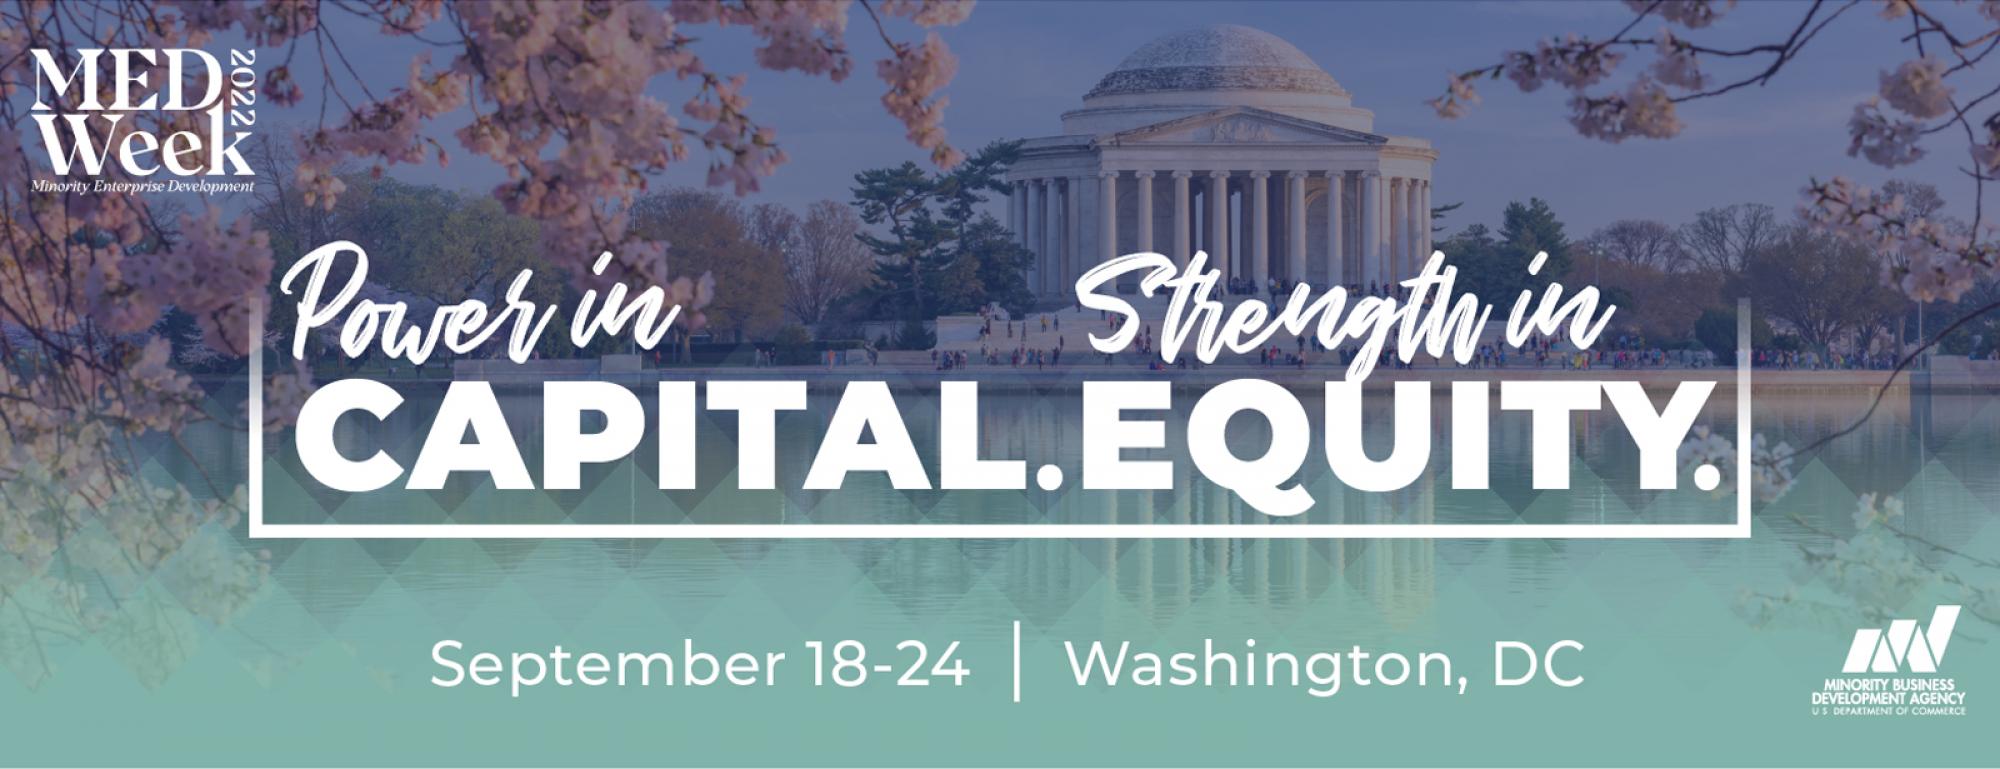 MED Week - Save The Date | Power in Capital | Strength in Equity | September 18-24 | Washington DC